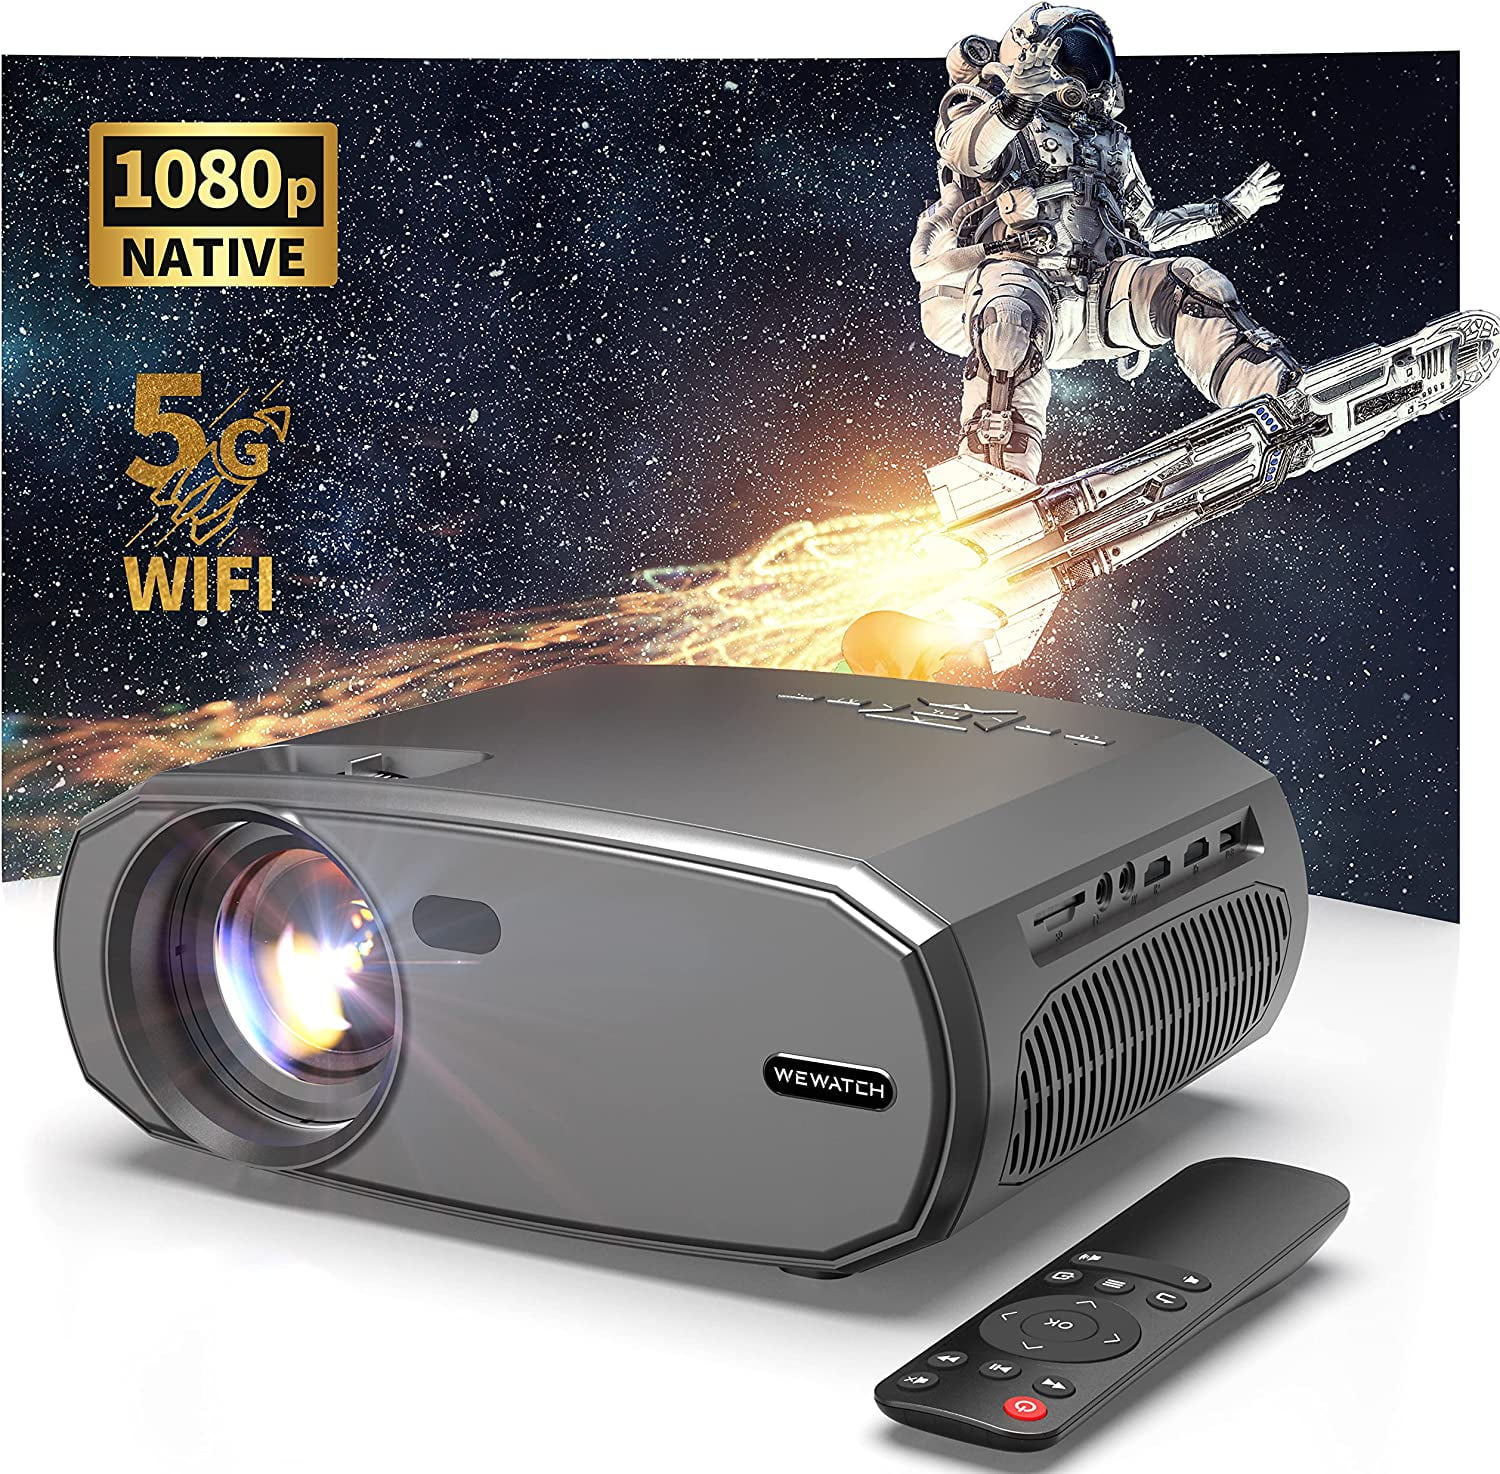 WEWATCH 15000 Lumens Projector with 5G WiFi 230 ANSI Lumen Projector, Keystone Correction 100% Zoom, Portable Projector for Home Theater, TV Sticker, HDMI, VGA, USB - Walmart.com